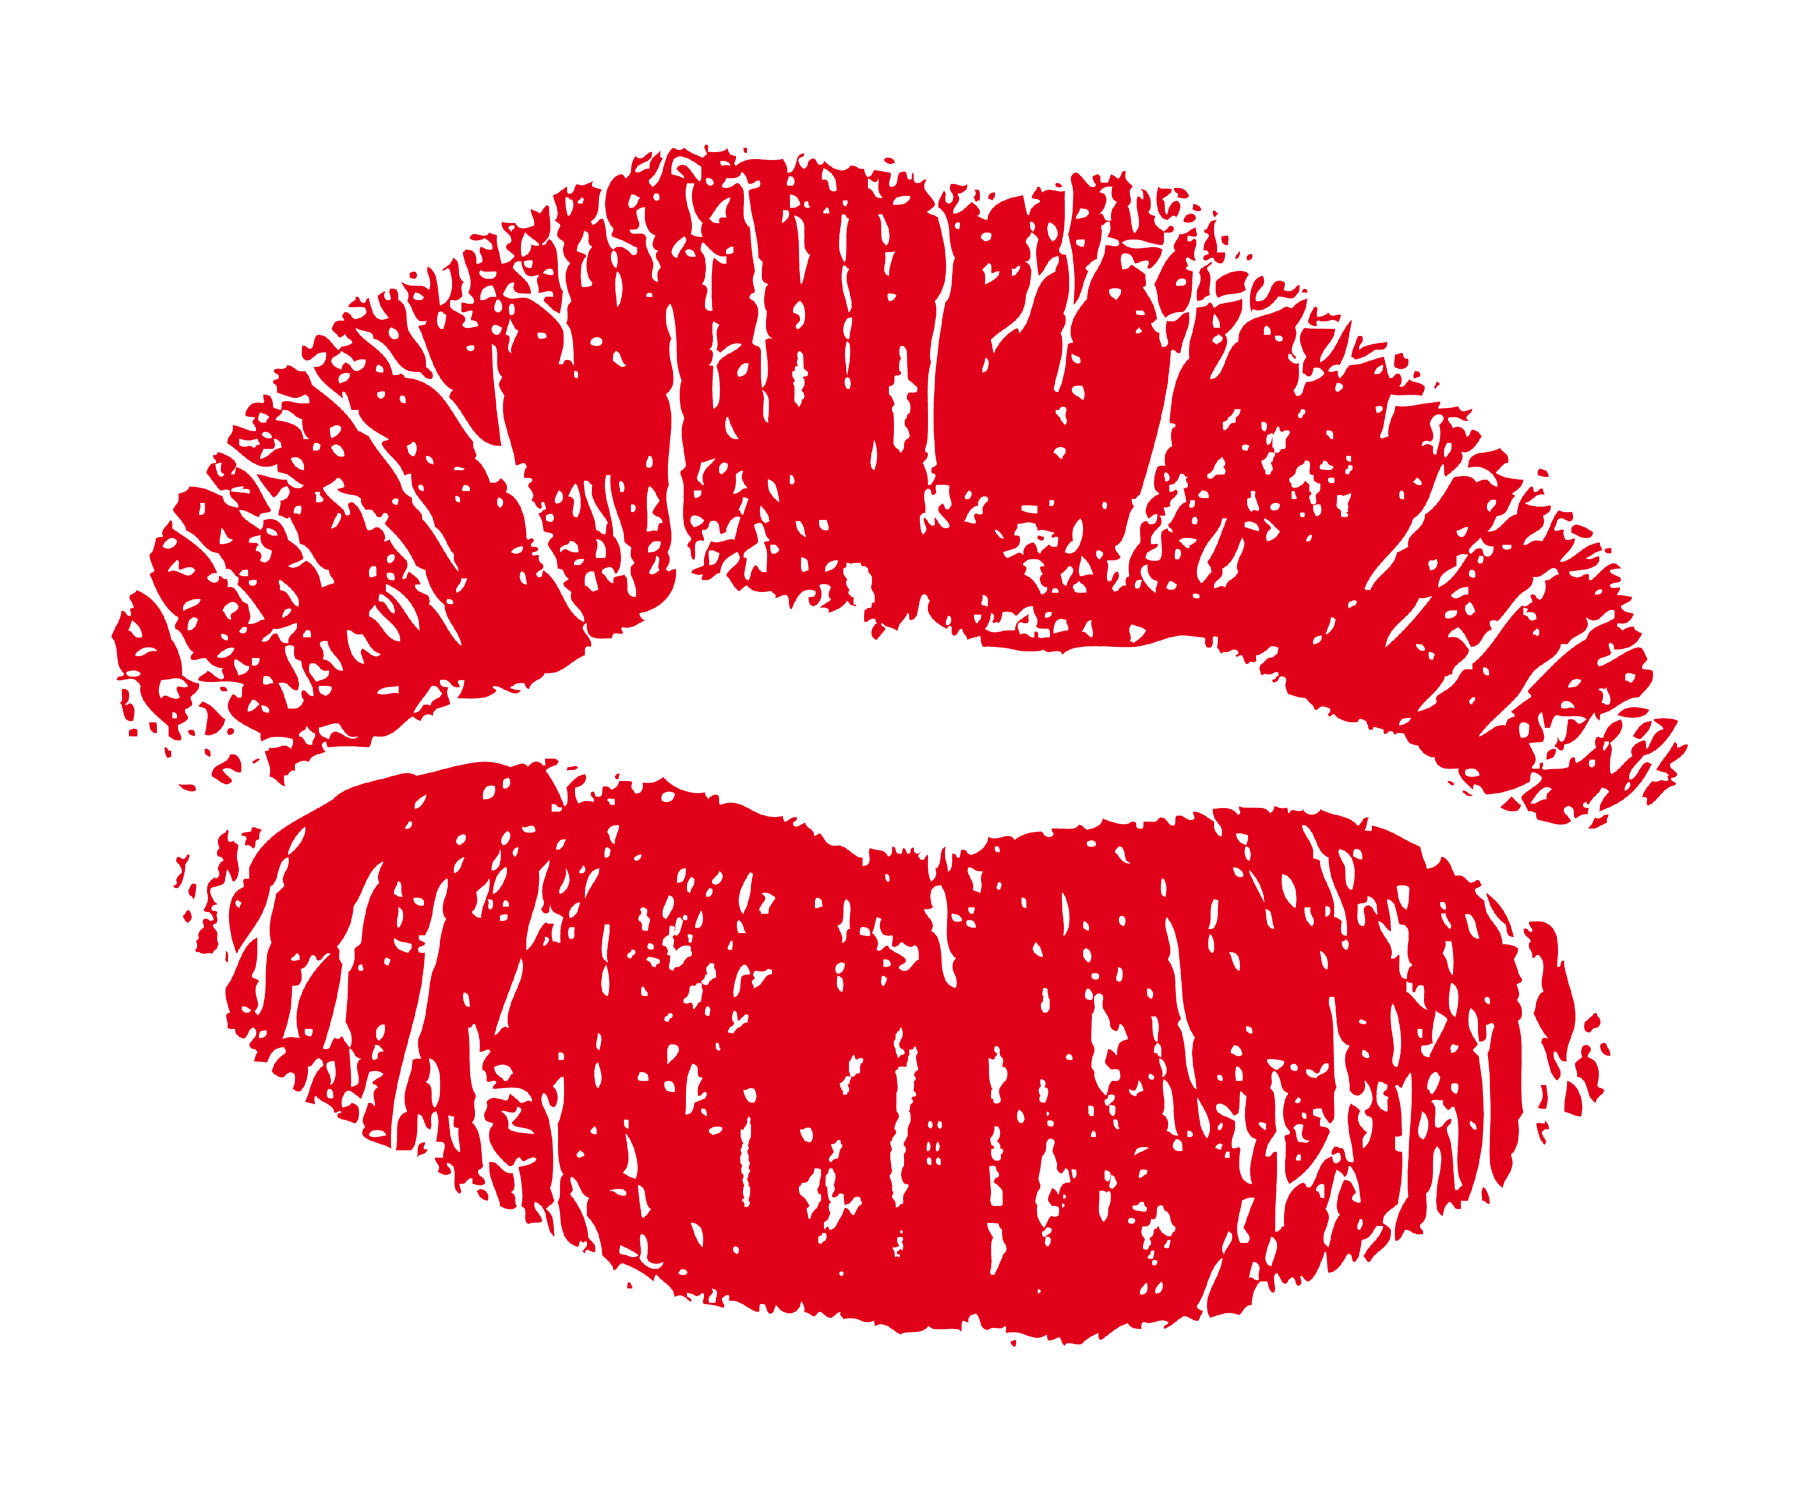 Red lips PNG image - Lips PNG